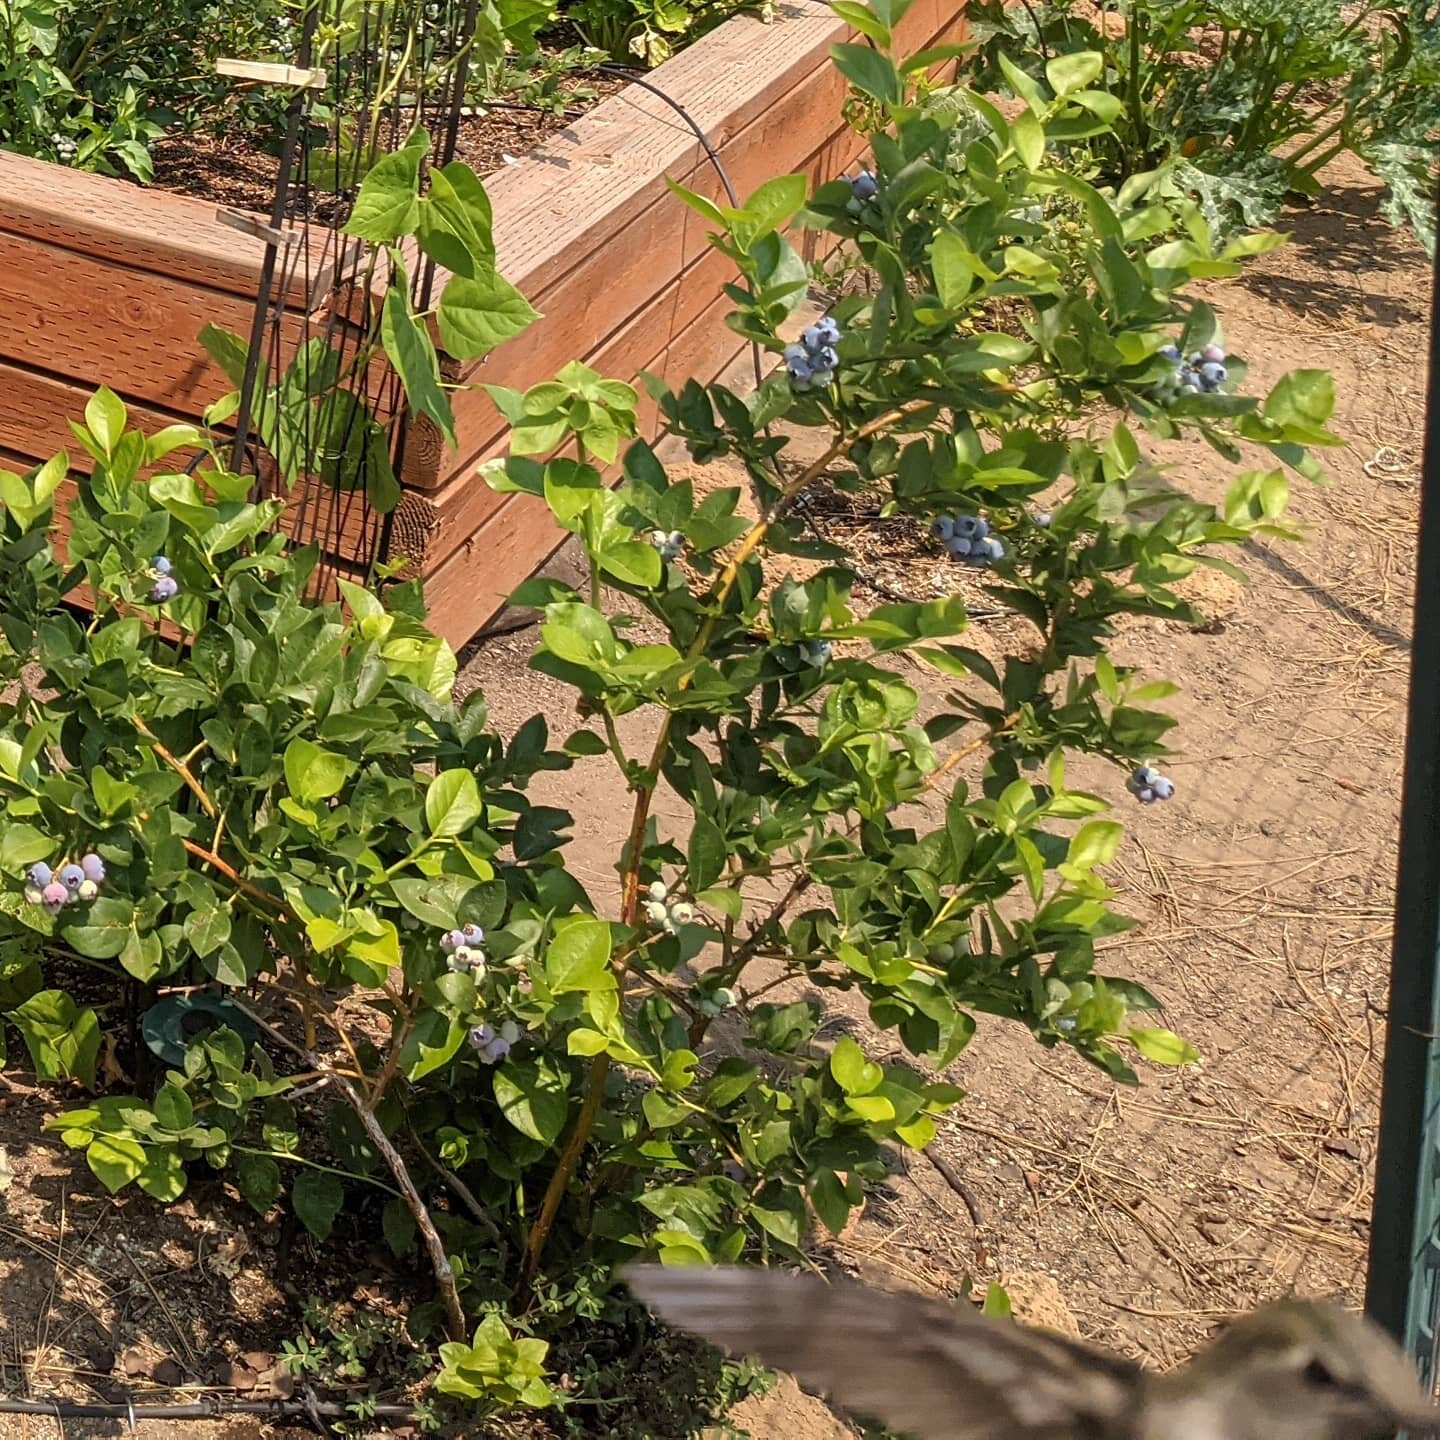 Admiring a client's garden, I got photobombed by a hummingbird! (Lower right) There was 2 of them, wish I could have got more pictures but they're too quick!! #waterwhysirrigation #waterwhys #dripirrigation #hummingbird